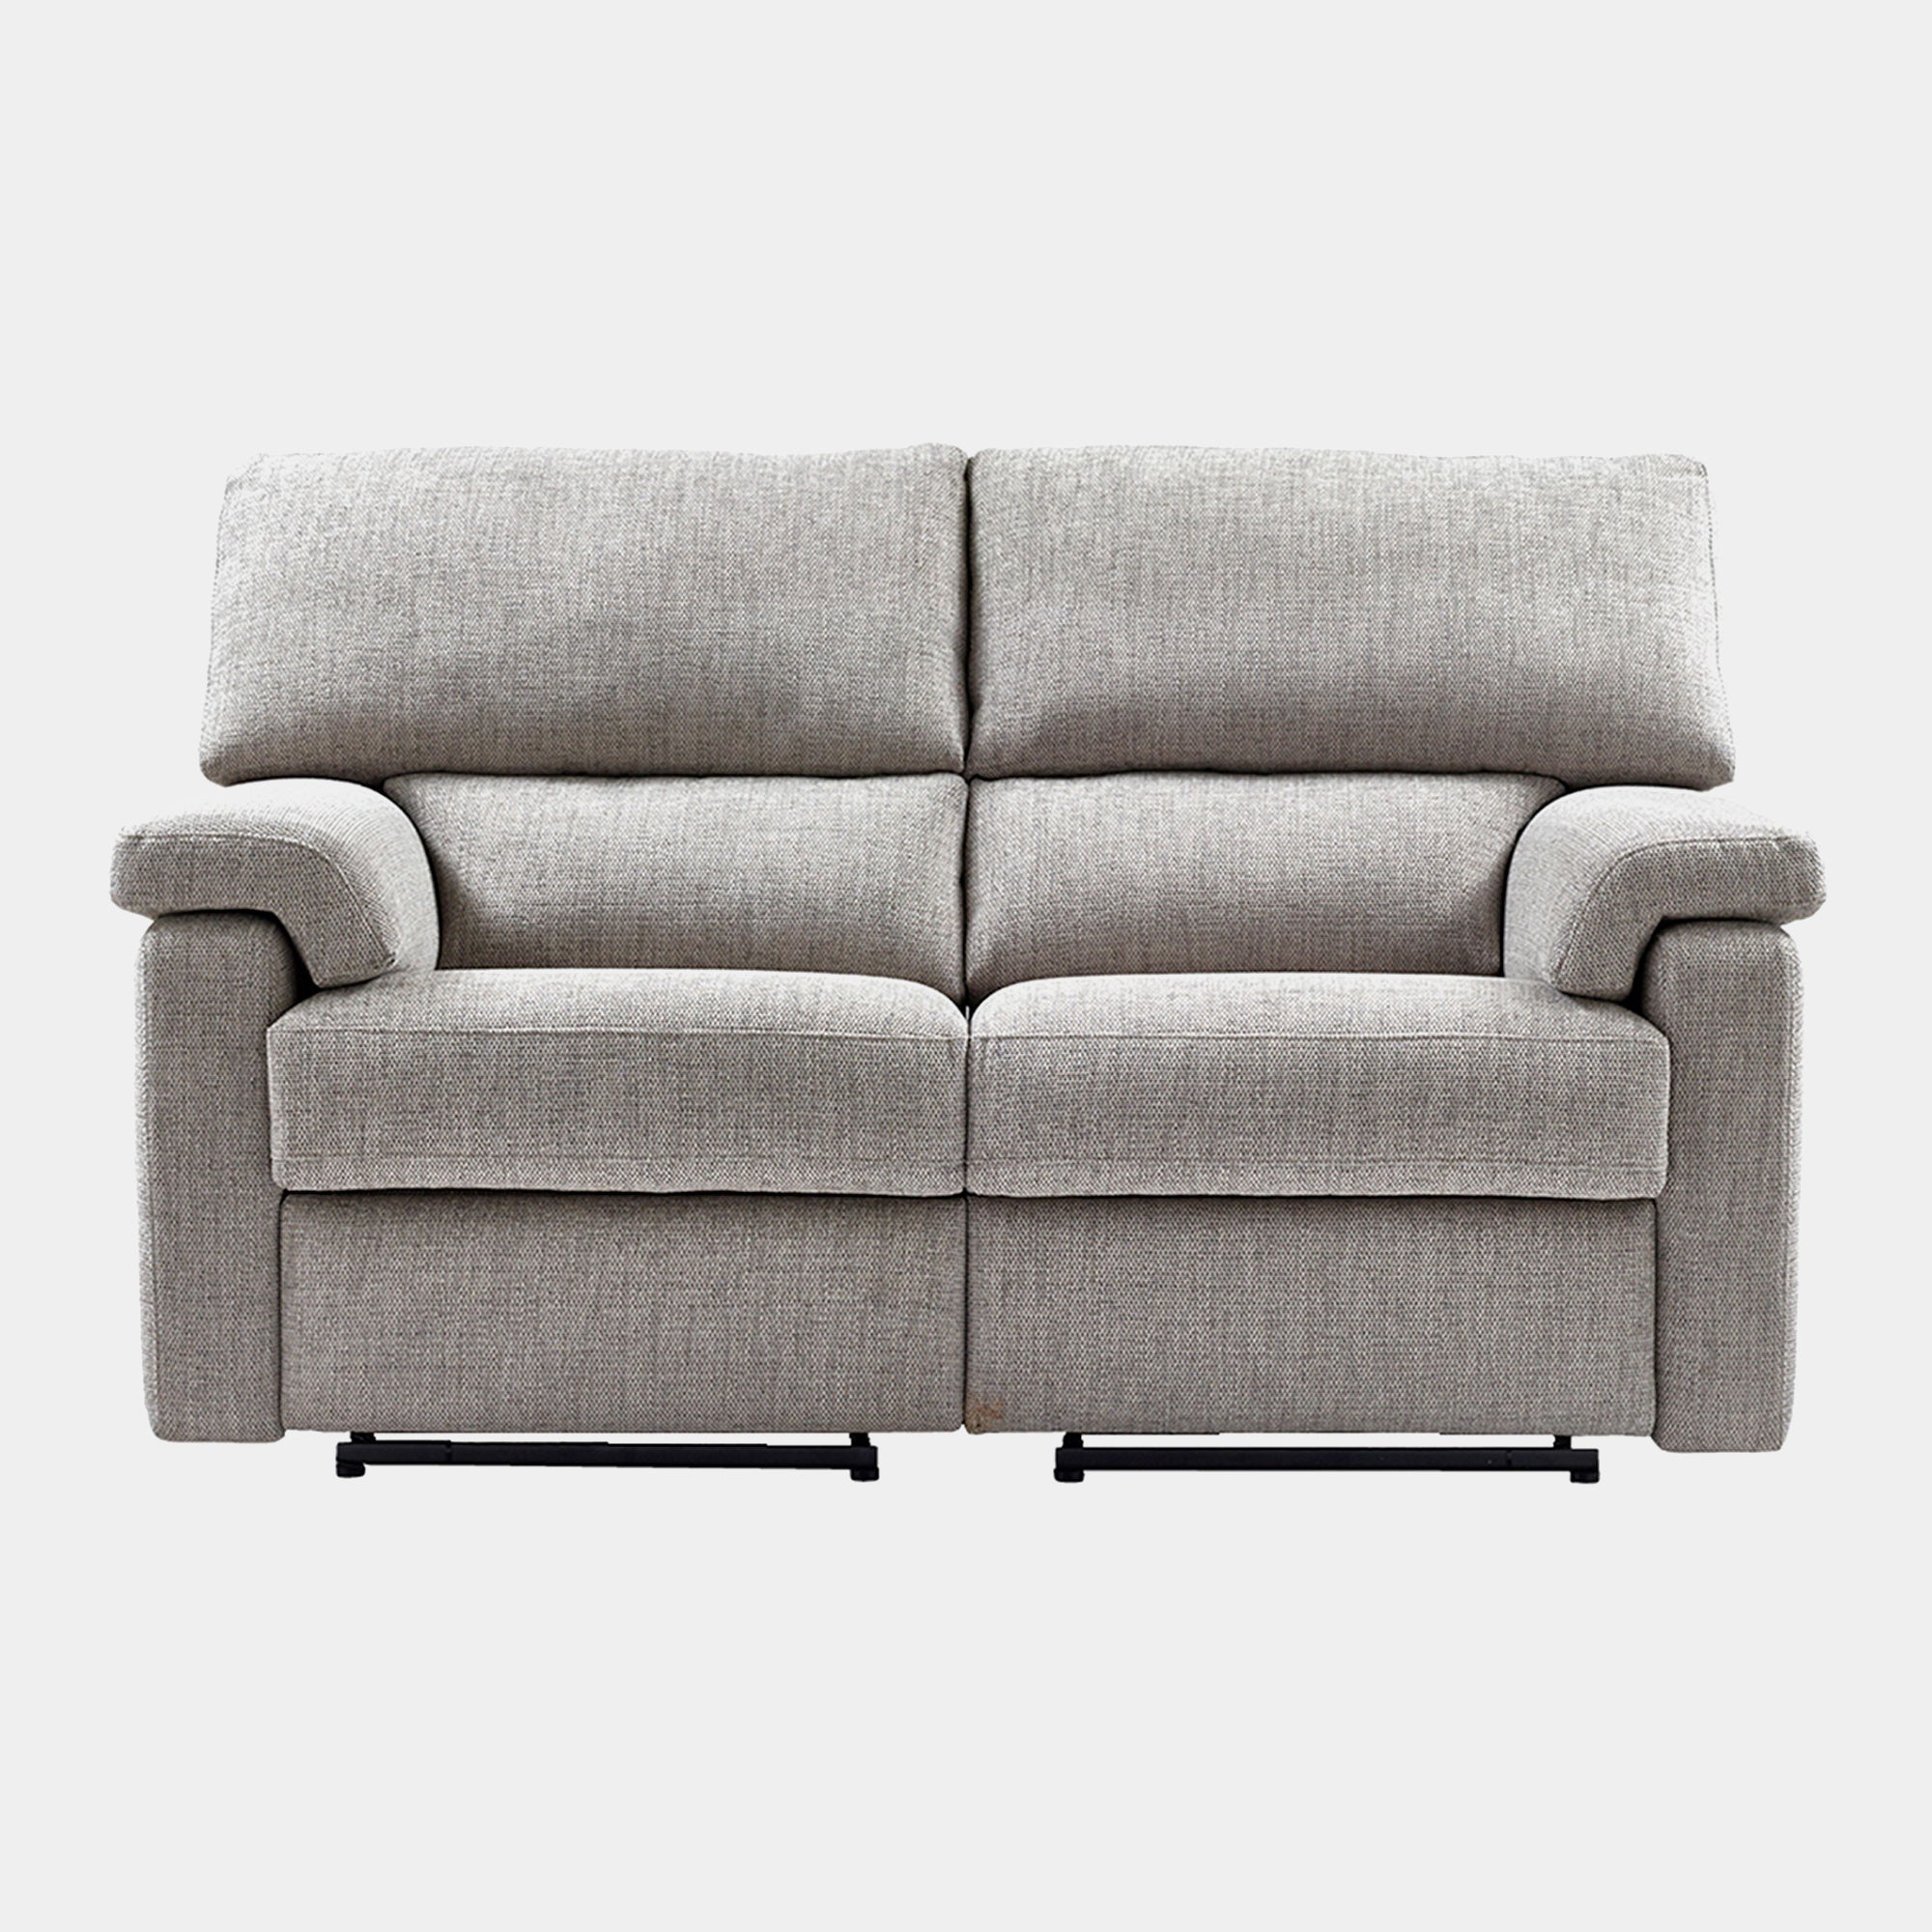 Crafton - 2 Seat Sofa Double Power Recliners In Fabric